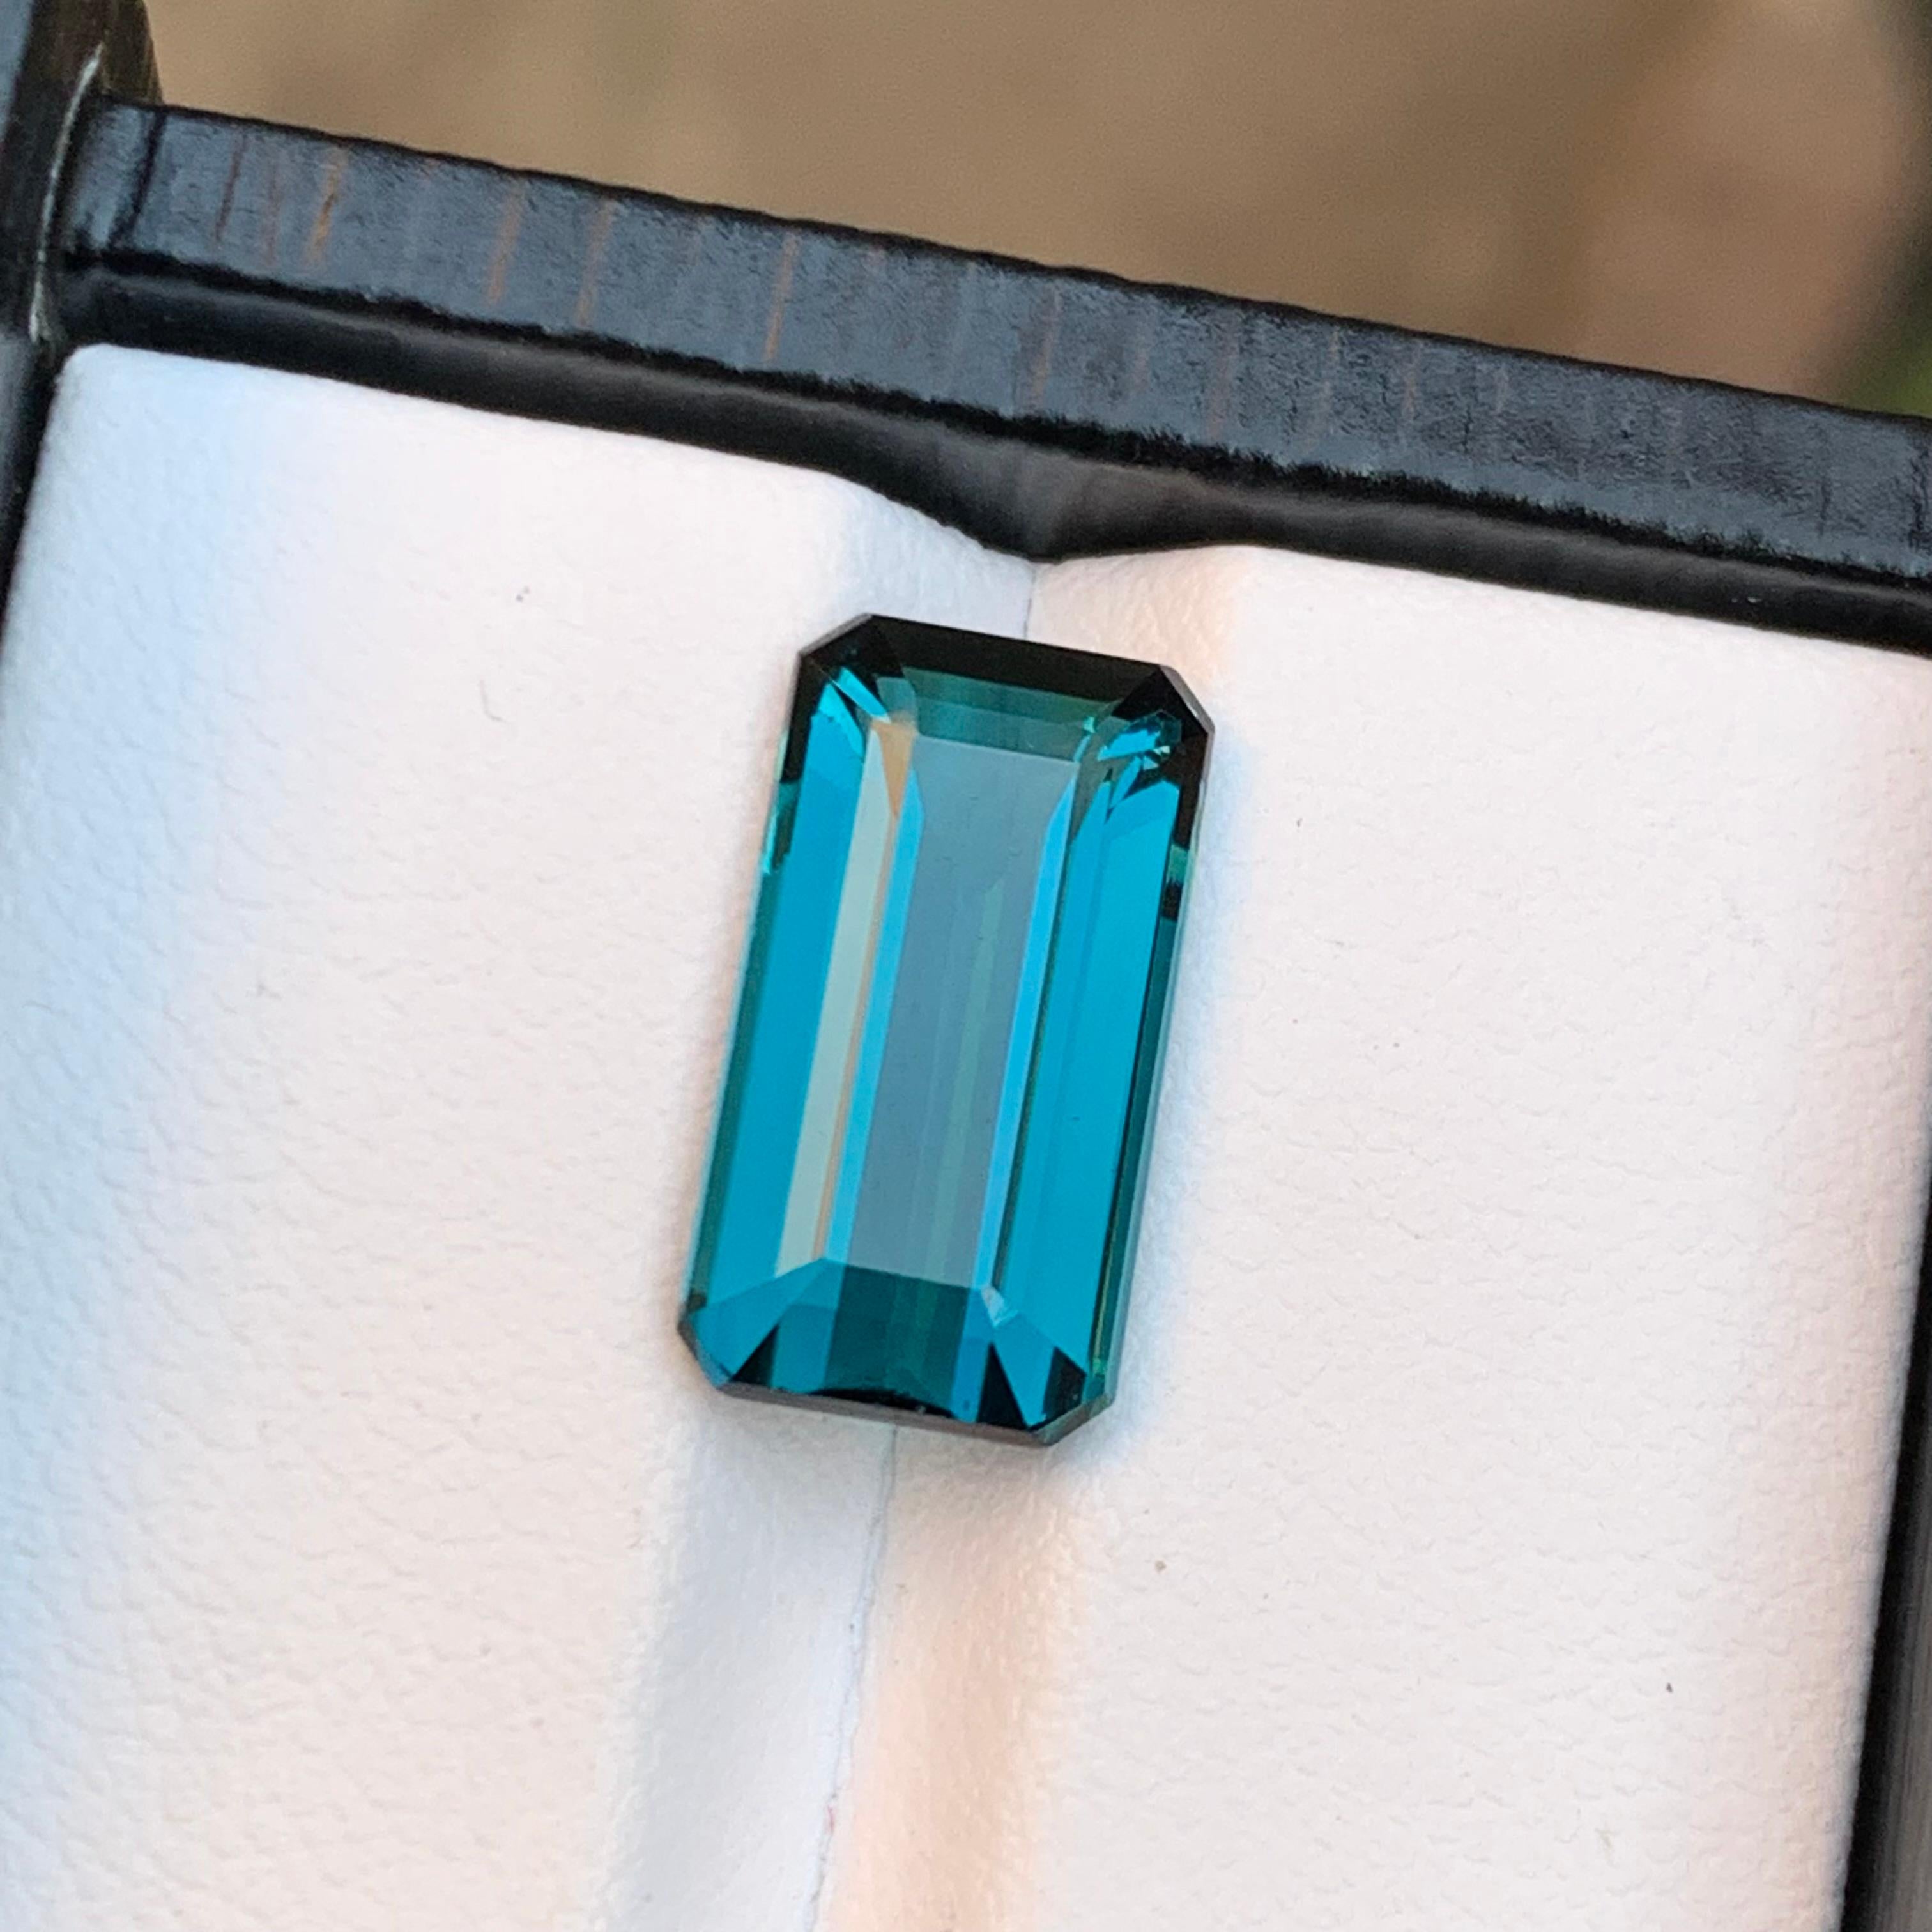 Gemstone Type: Tourmaline
Weight: 5.20 Carats
Dimensions: 14.41 x 7.82 x 5.09 mm
Color: Indicolite Blue
Clarity: Eye Clean
Treatment: Untreated 
Origin: Afghanistan 🇦🇫 
Certificate: On demand 

This stunning emerald-cut indicolite blue tourmaline